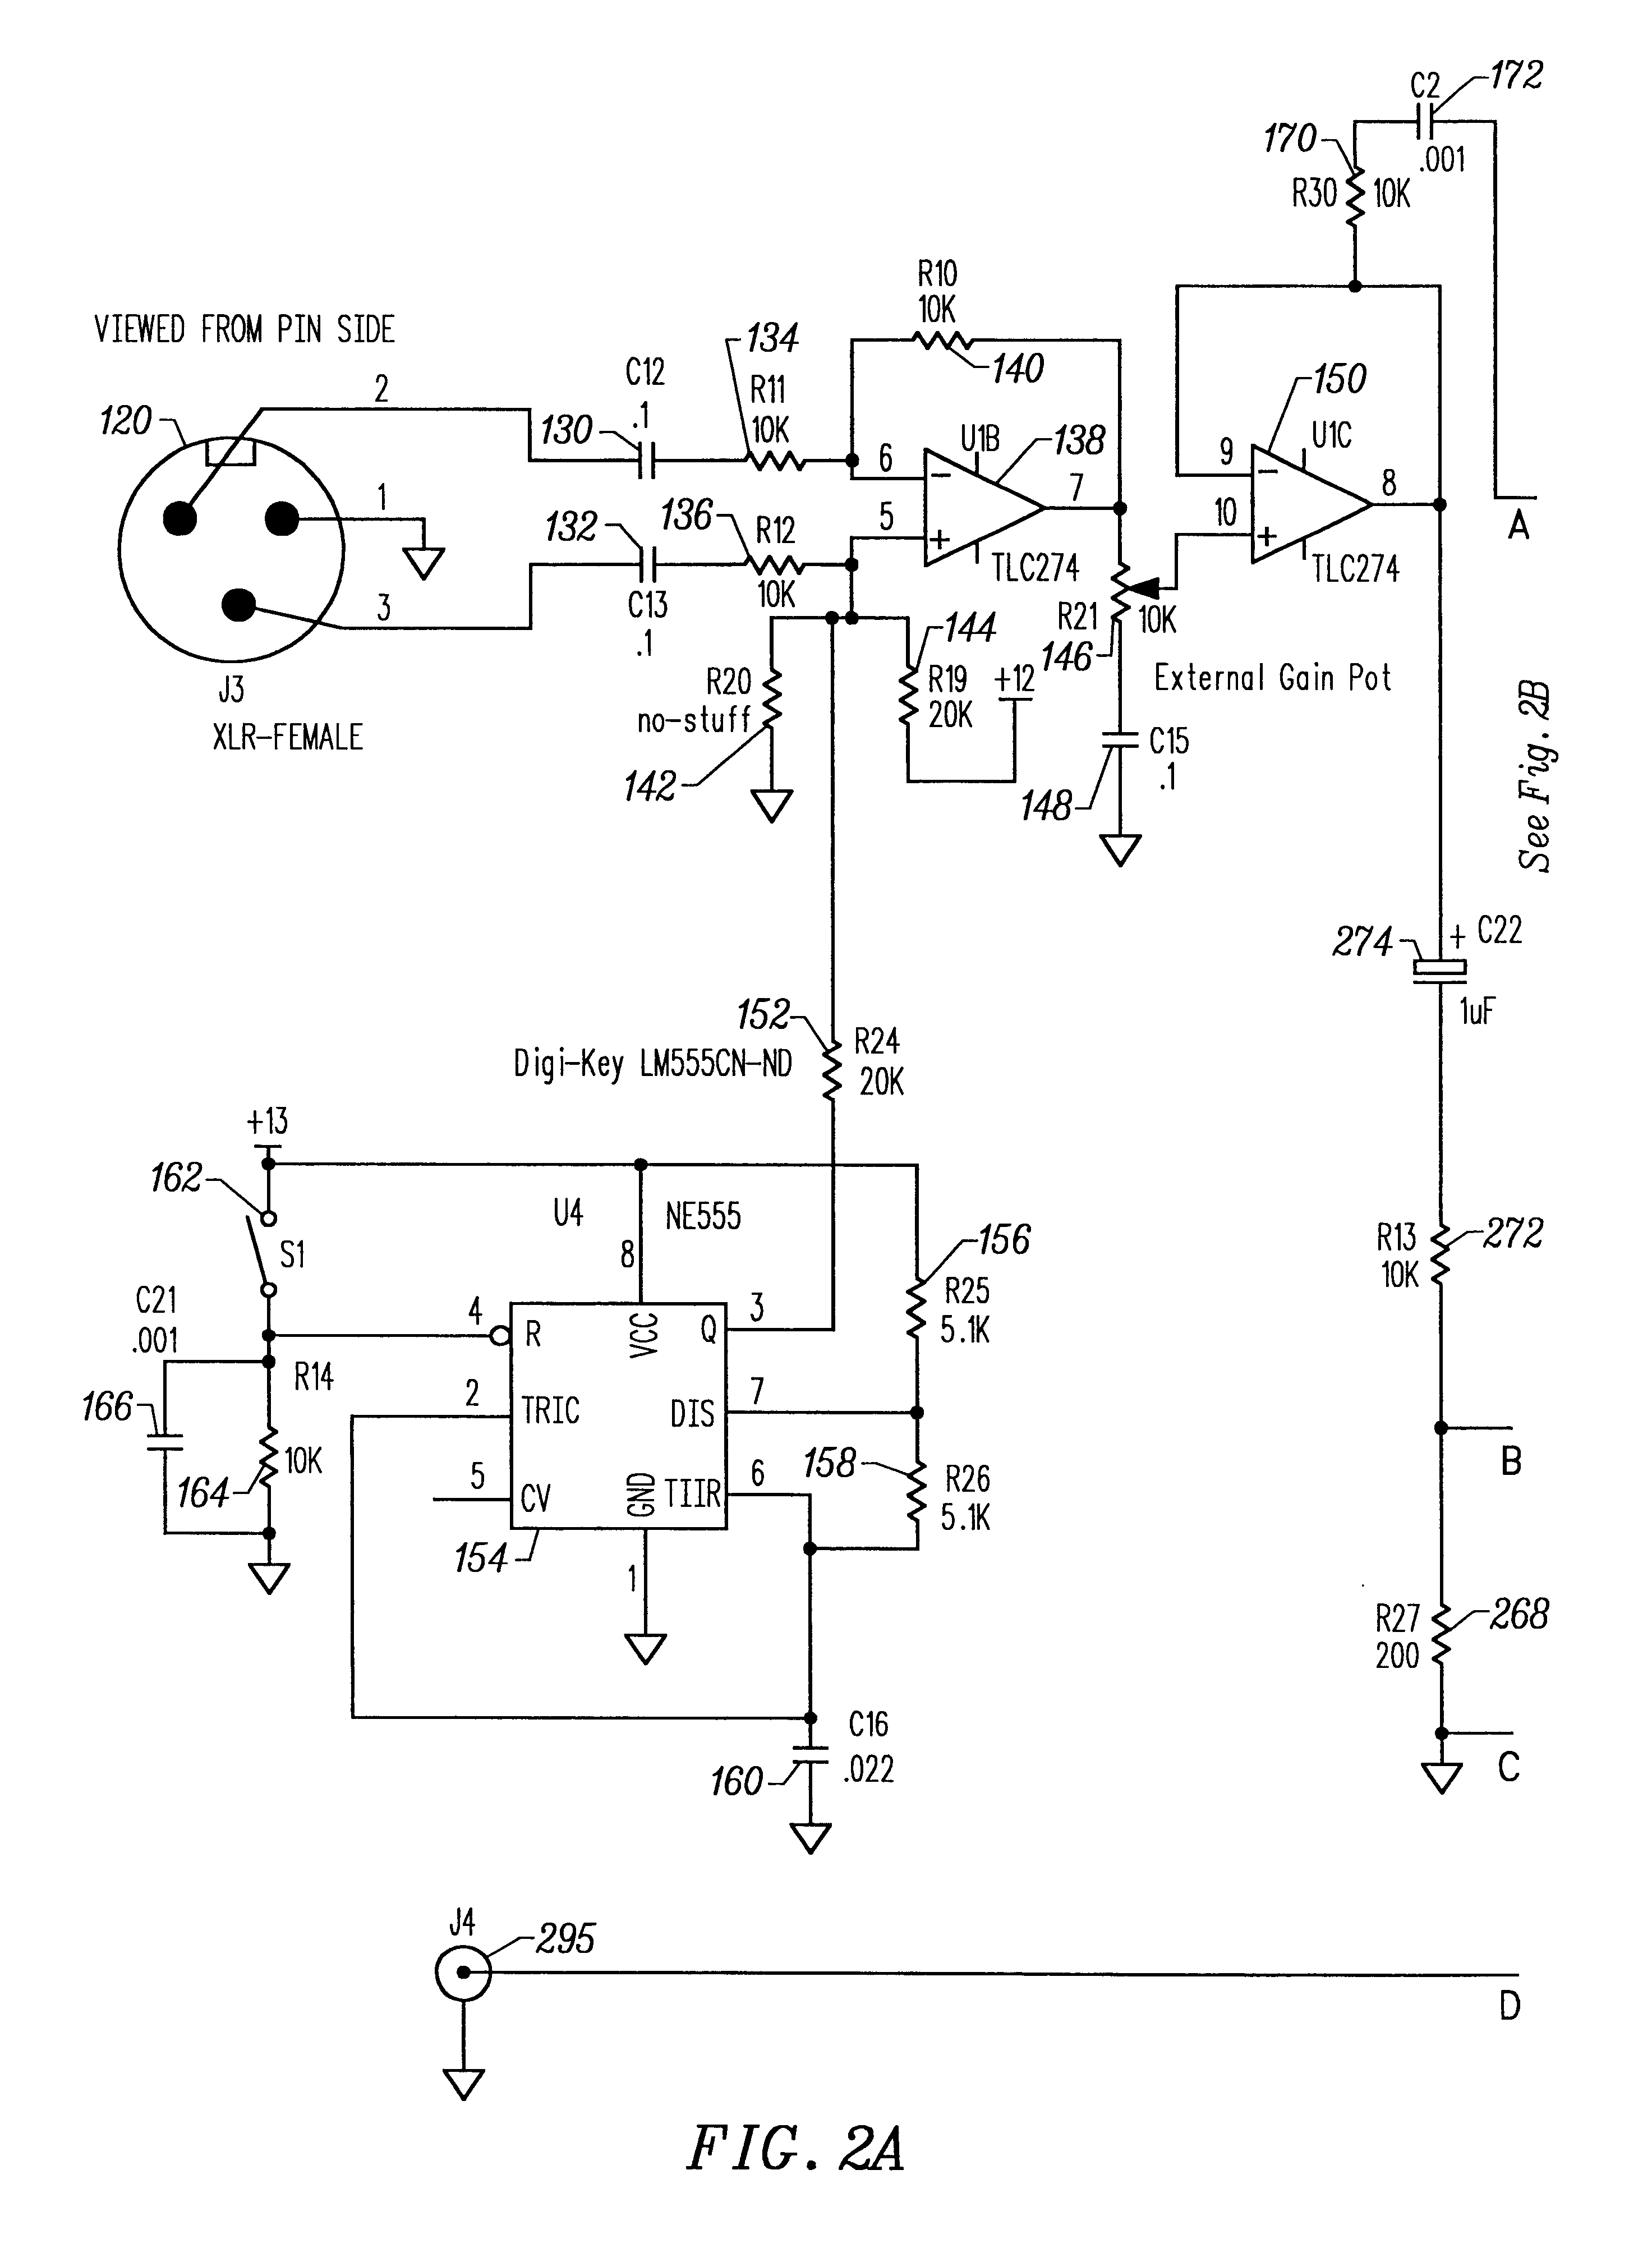 System for determining the end of a path for a moving object